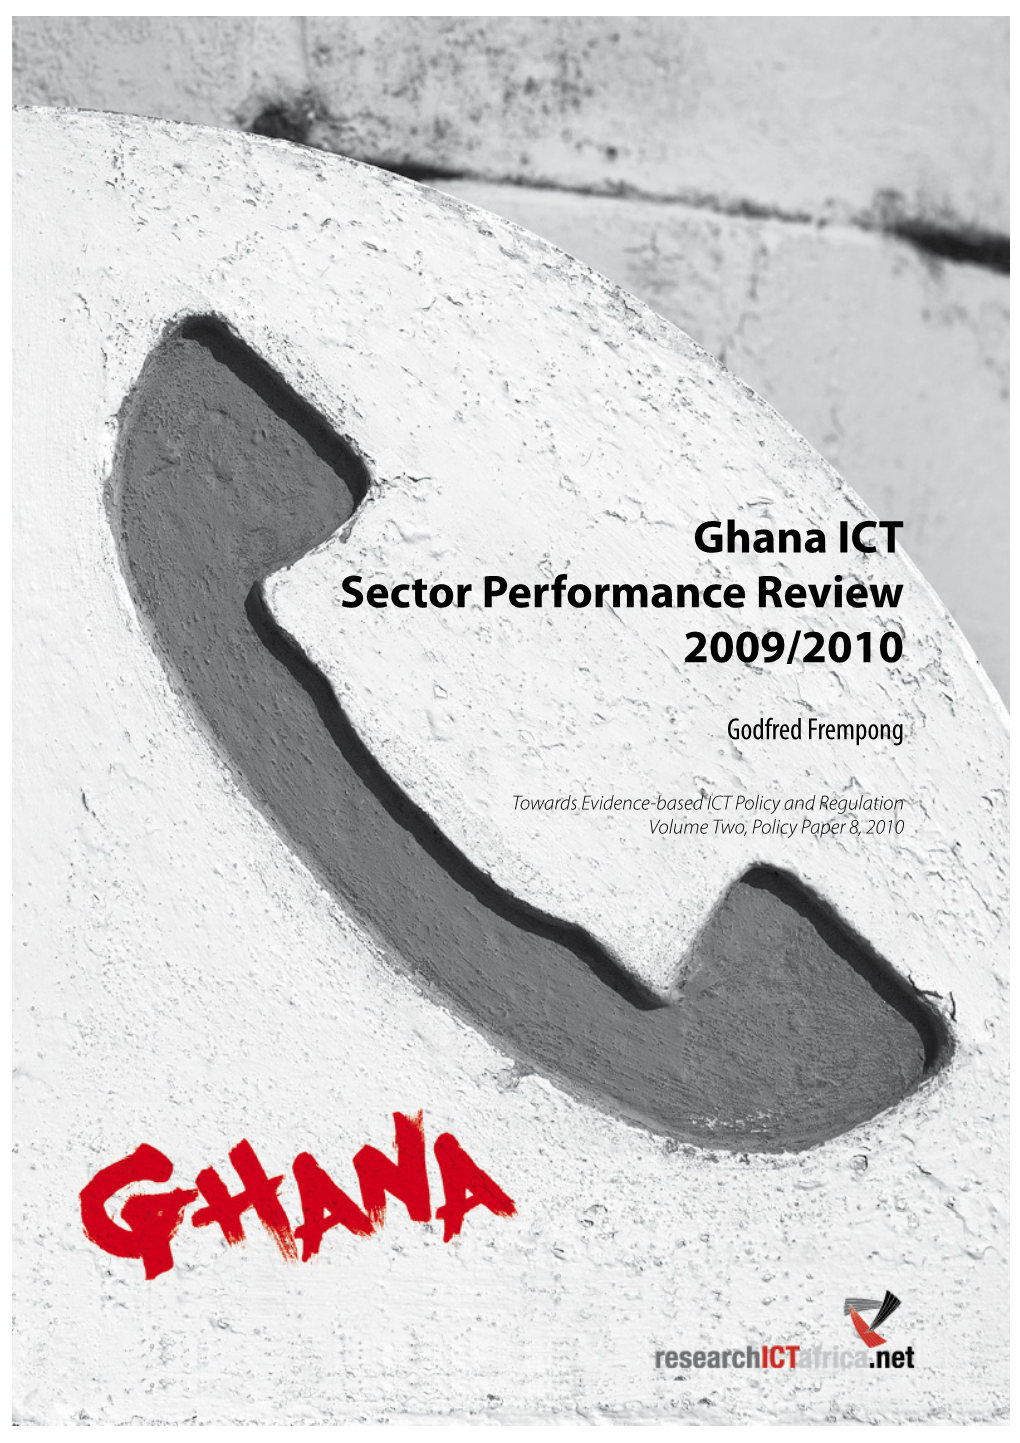 Ghana ICT Sector Performance Review 2009/2010